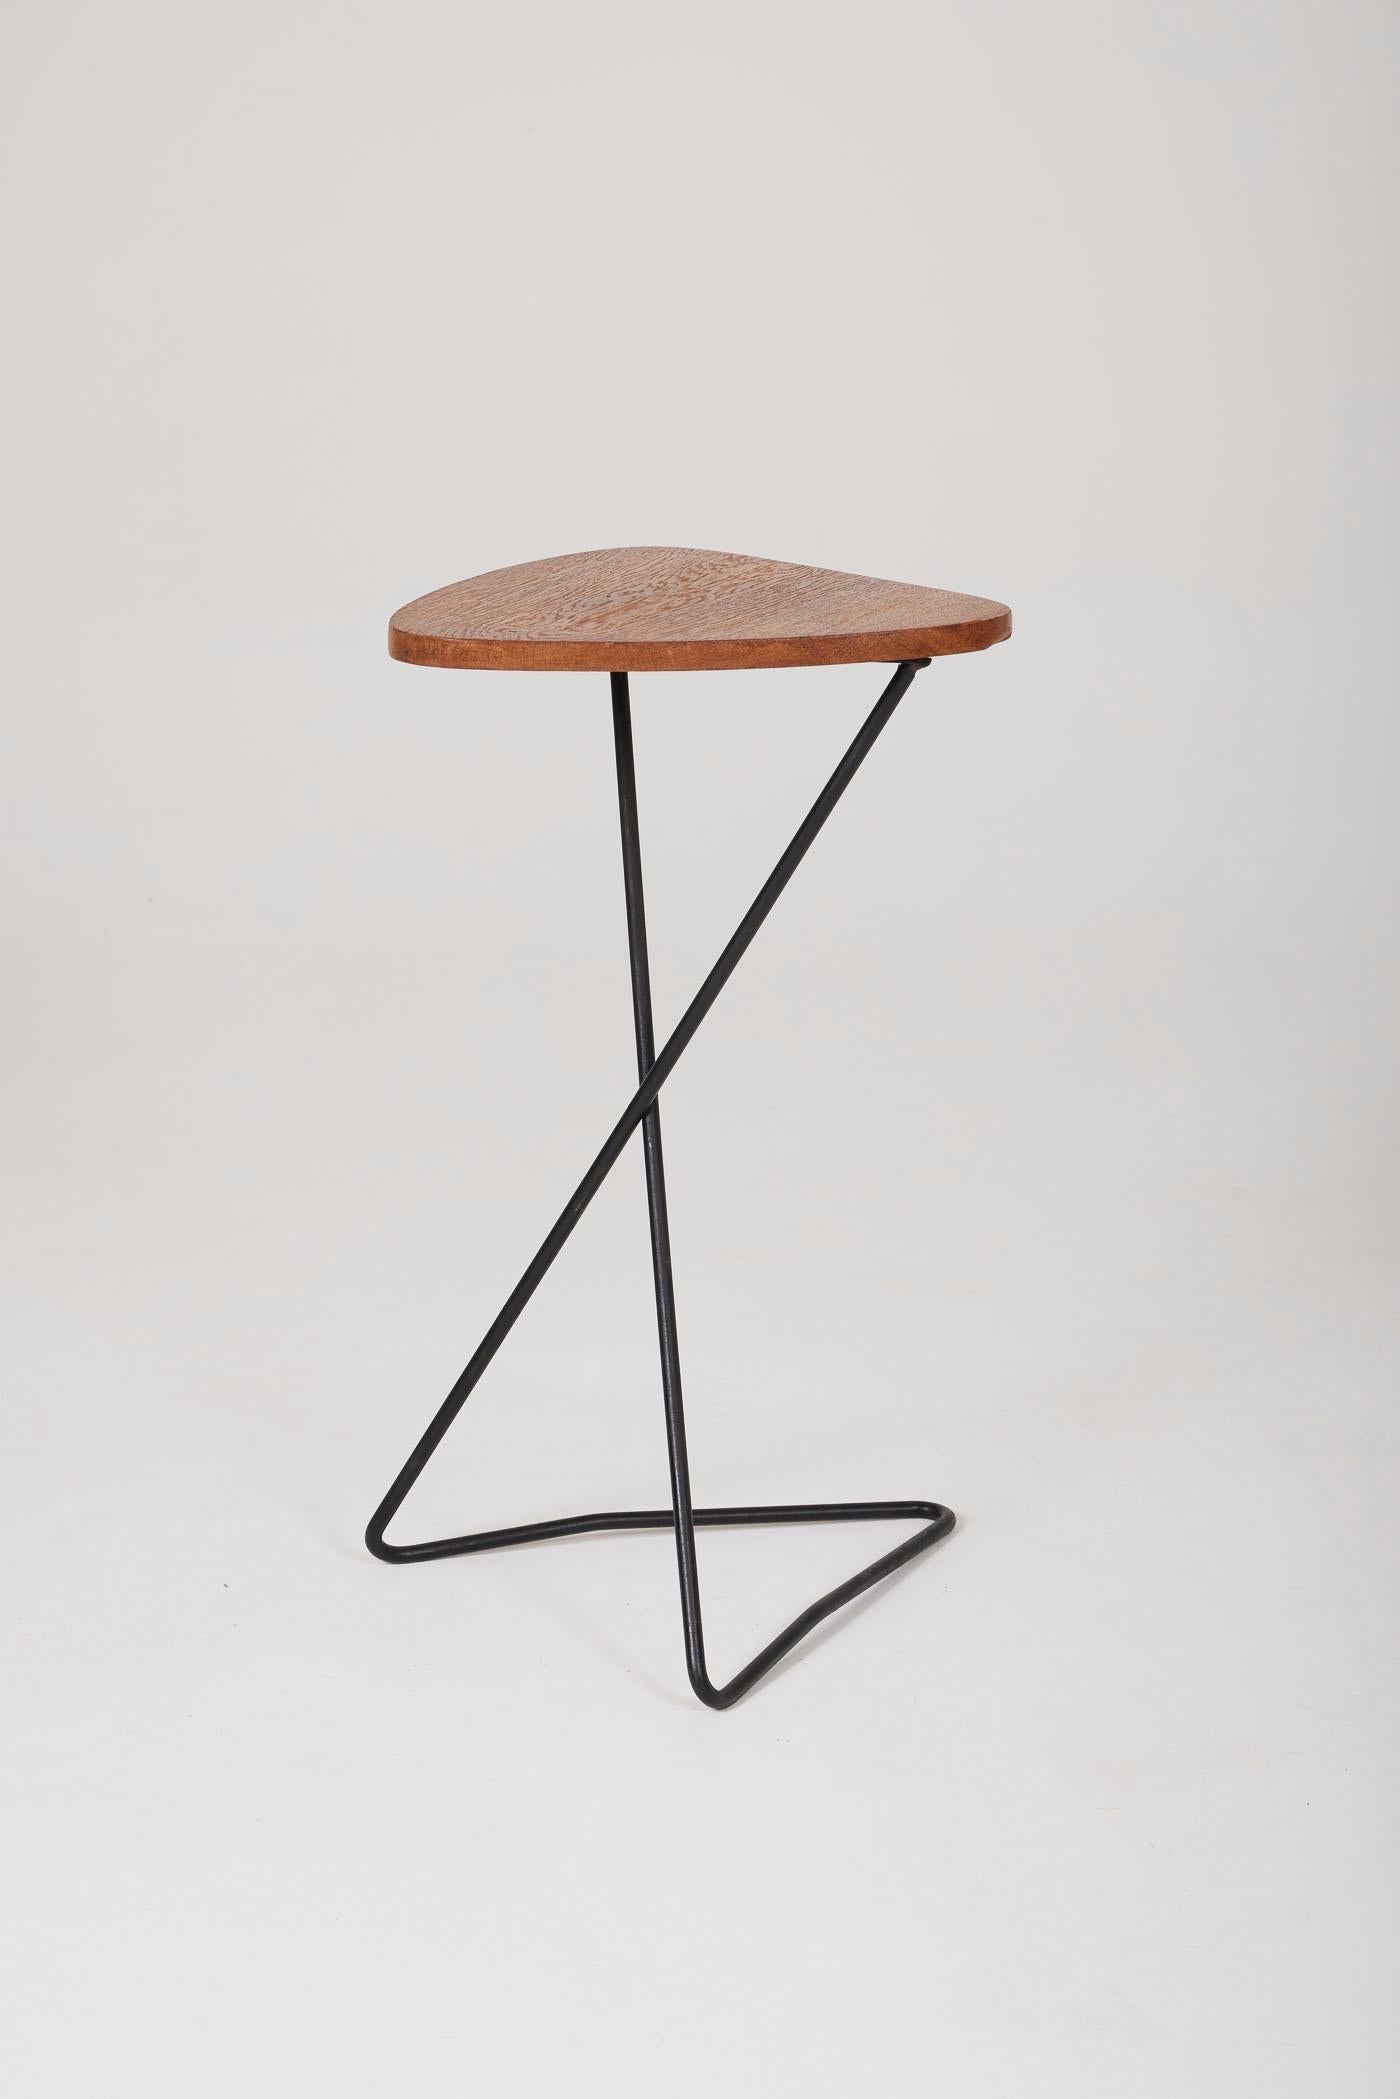 Triangular wooden top side table resting on a black lacquered tubular metal base. 2 tables available. In perfect condition.
DV479